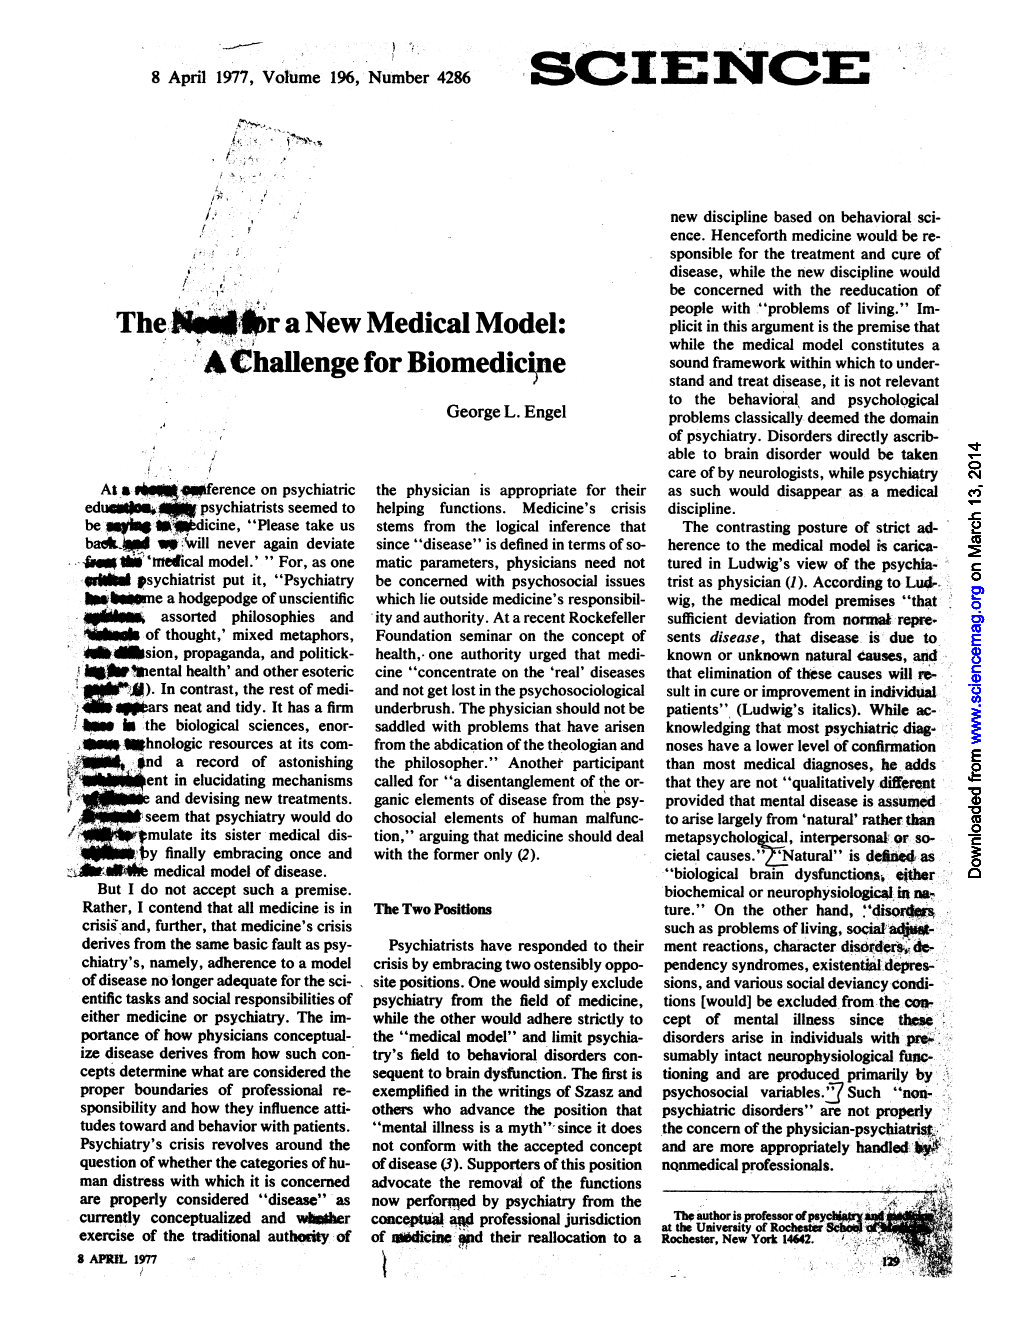 Engel GL. the Need for a New Medical Model